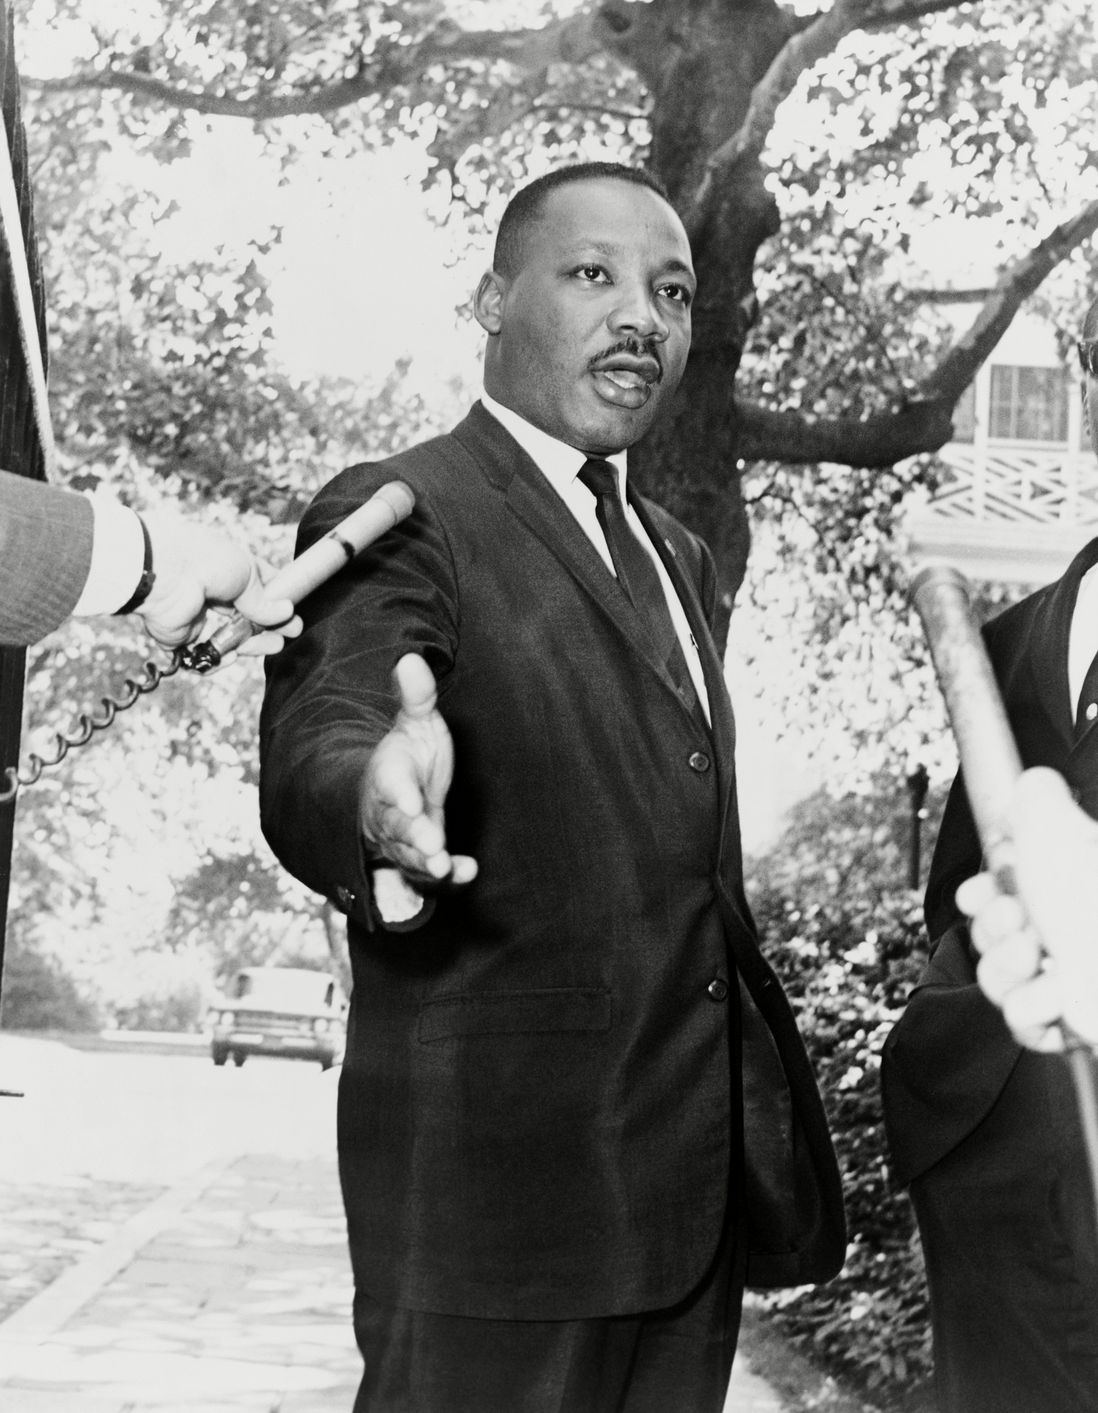 Martin Luther King, Jr. at Gracie Mansion, the official residence of Mayor Robert Wagner, after 15-year-old James Powell was fatally shot by an NYPD officer. July 1964.